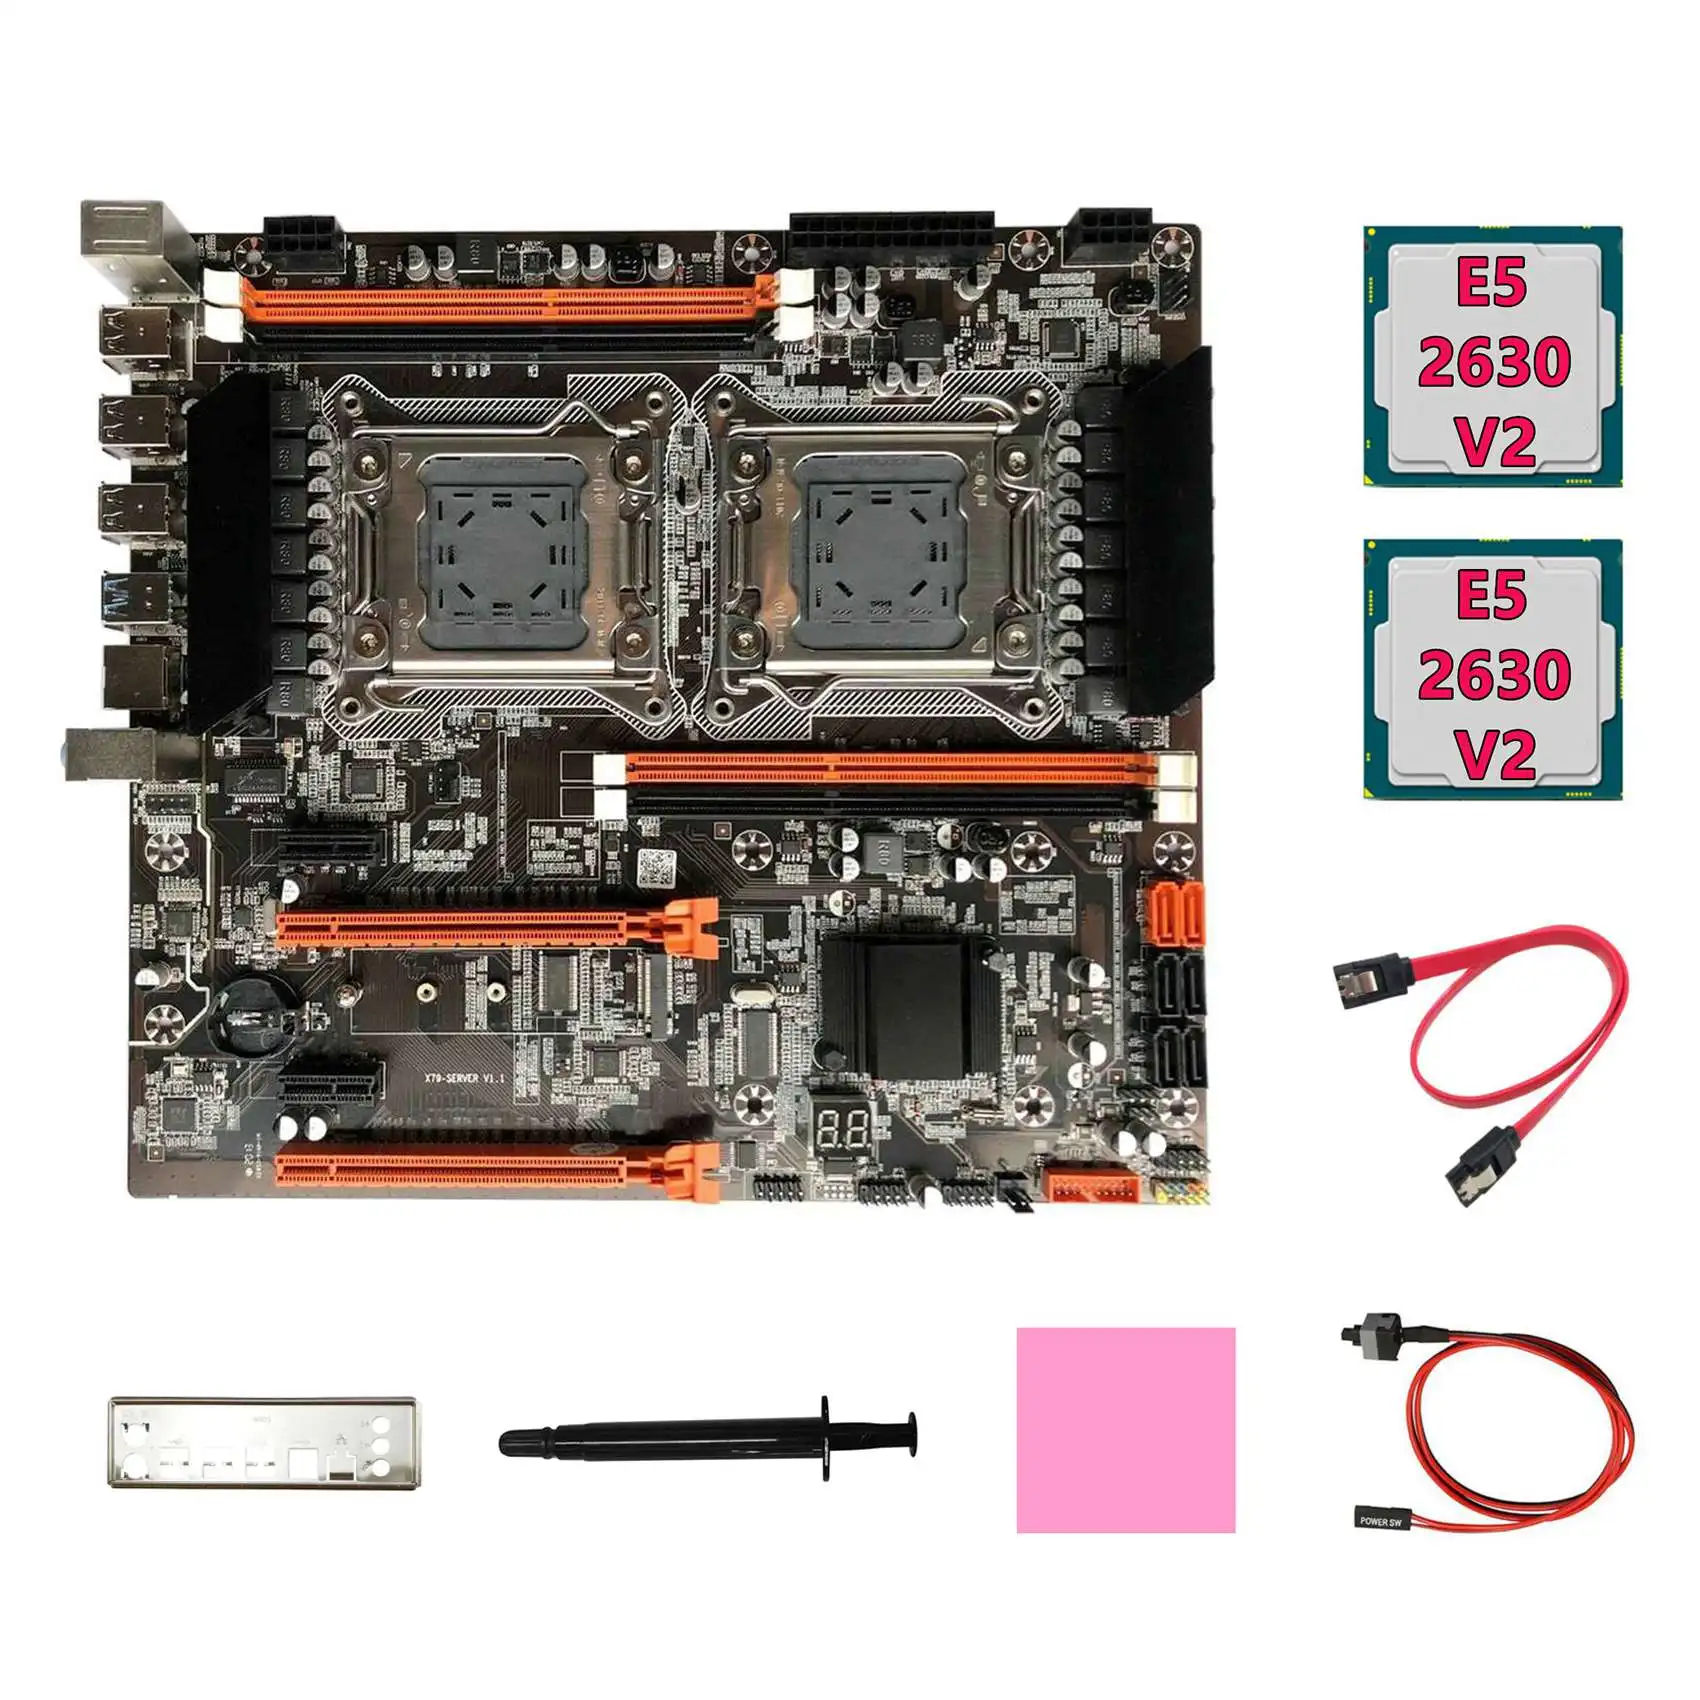 

Motherboard+2XE5 2630 V2 CPU+SATA Cable+Switch Cable+Baffle+Thermal Grease+Thermal Pad LGA2011 M.2 NVME X79 Motherboard